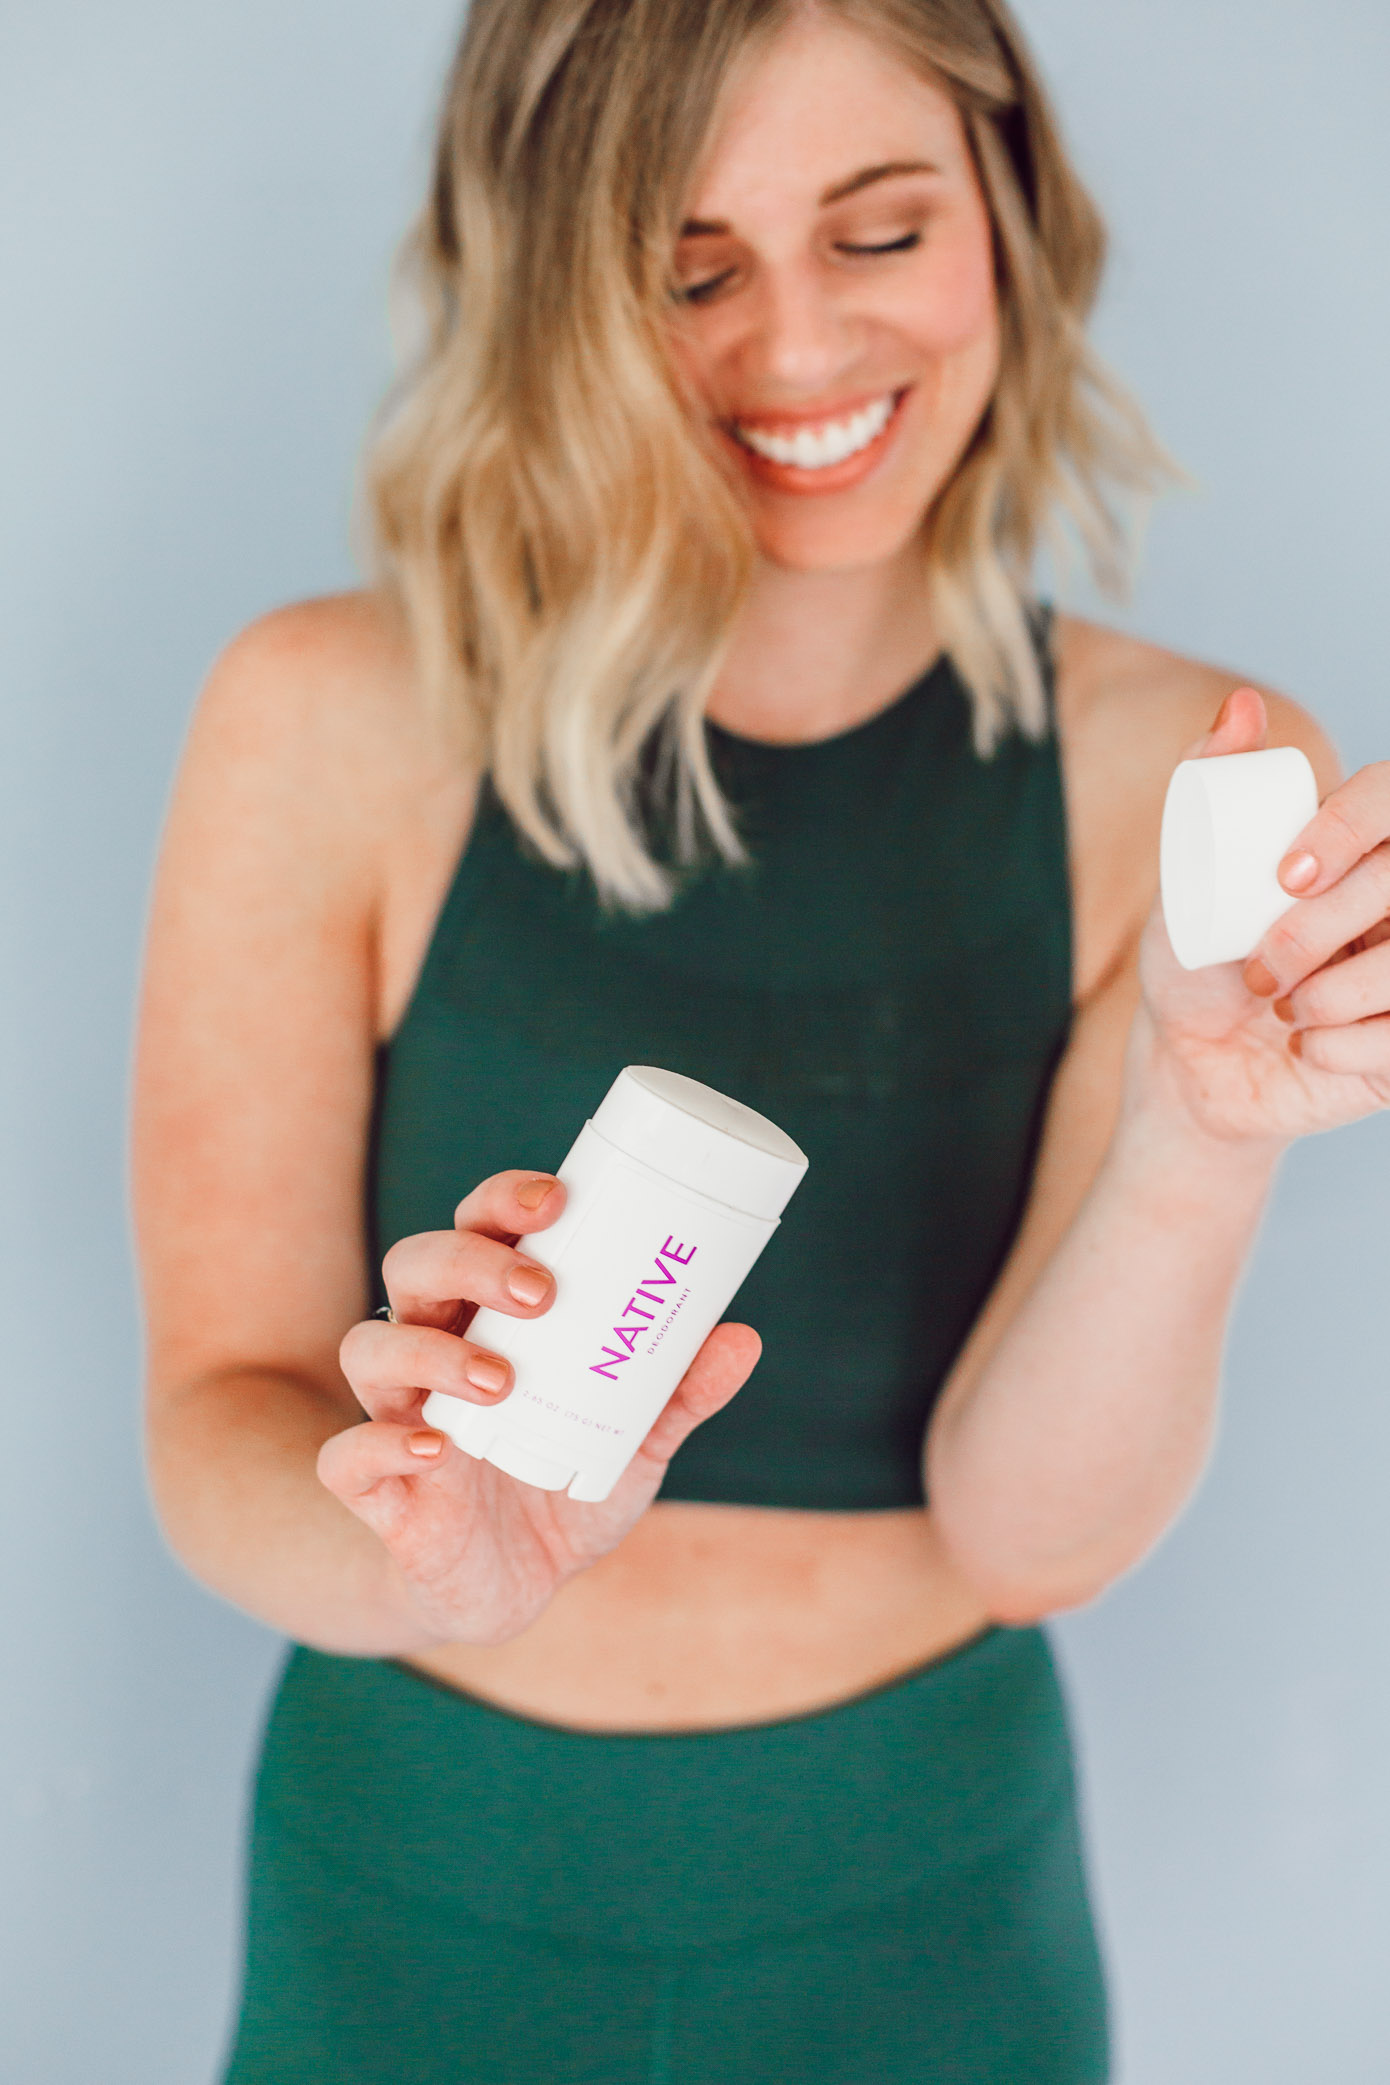 Why You Should Switch to Natural Deodorant | Honest Review of Native's Natural Deodorant | Louella Reese